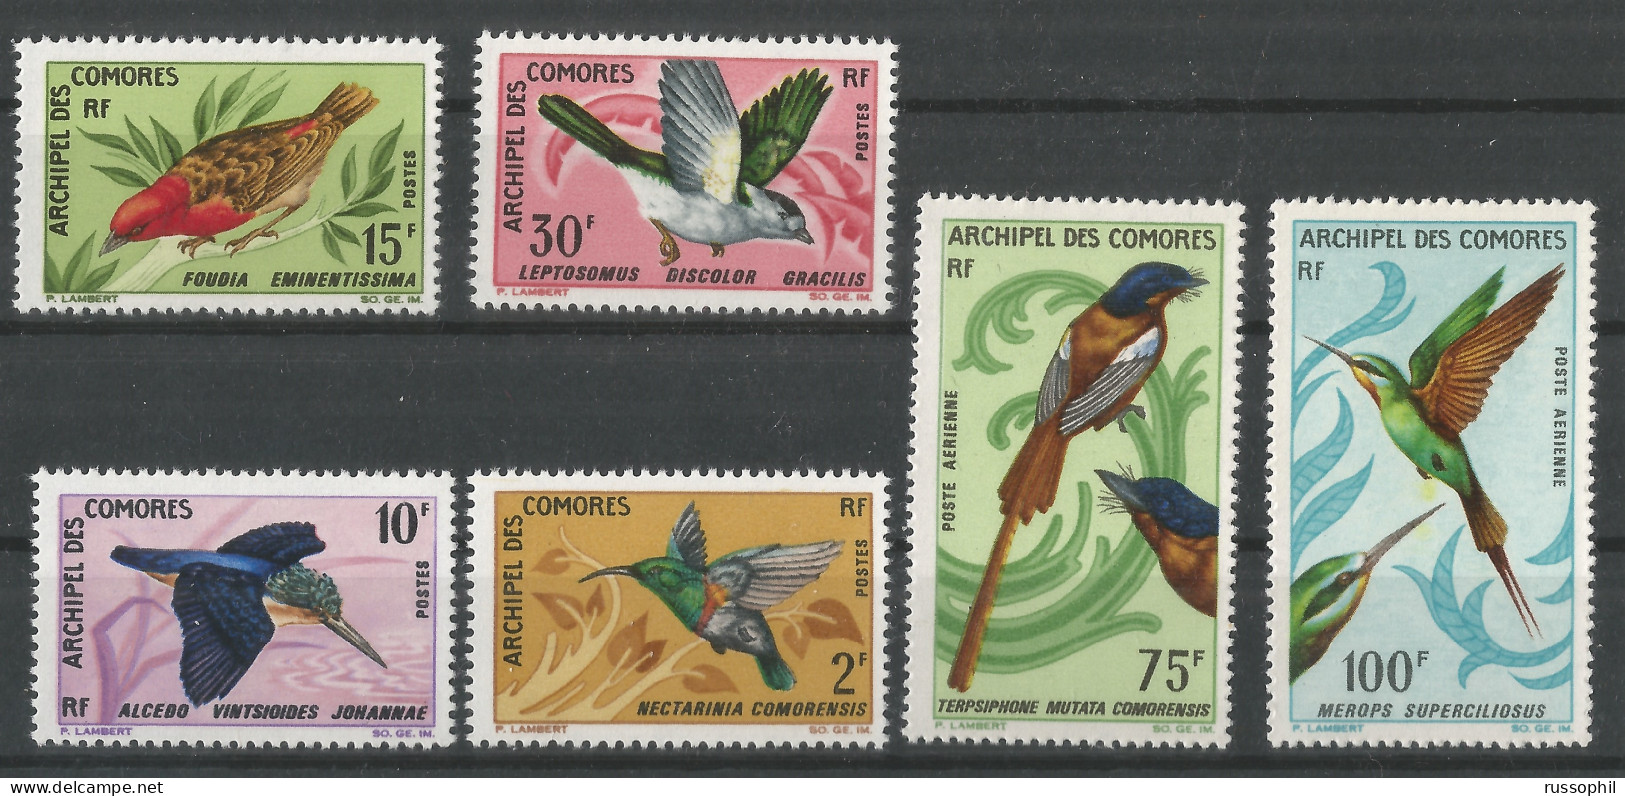 COMORES - OISEAUX - BIRDS -  Yv. #41 TO Yv. #44 AND Yv. #PA20 AND Yv. #PA21 -  (**/MNH) - 1967 - Neufs